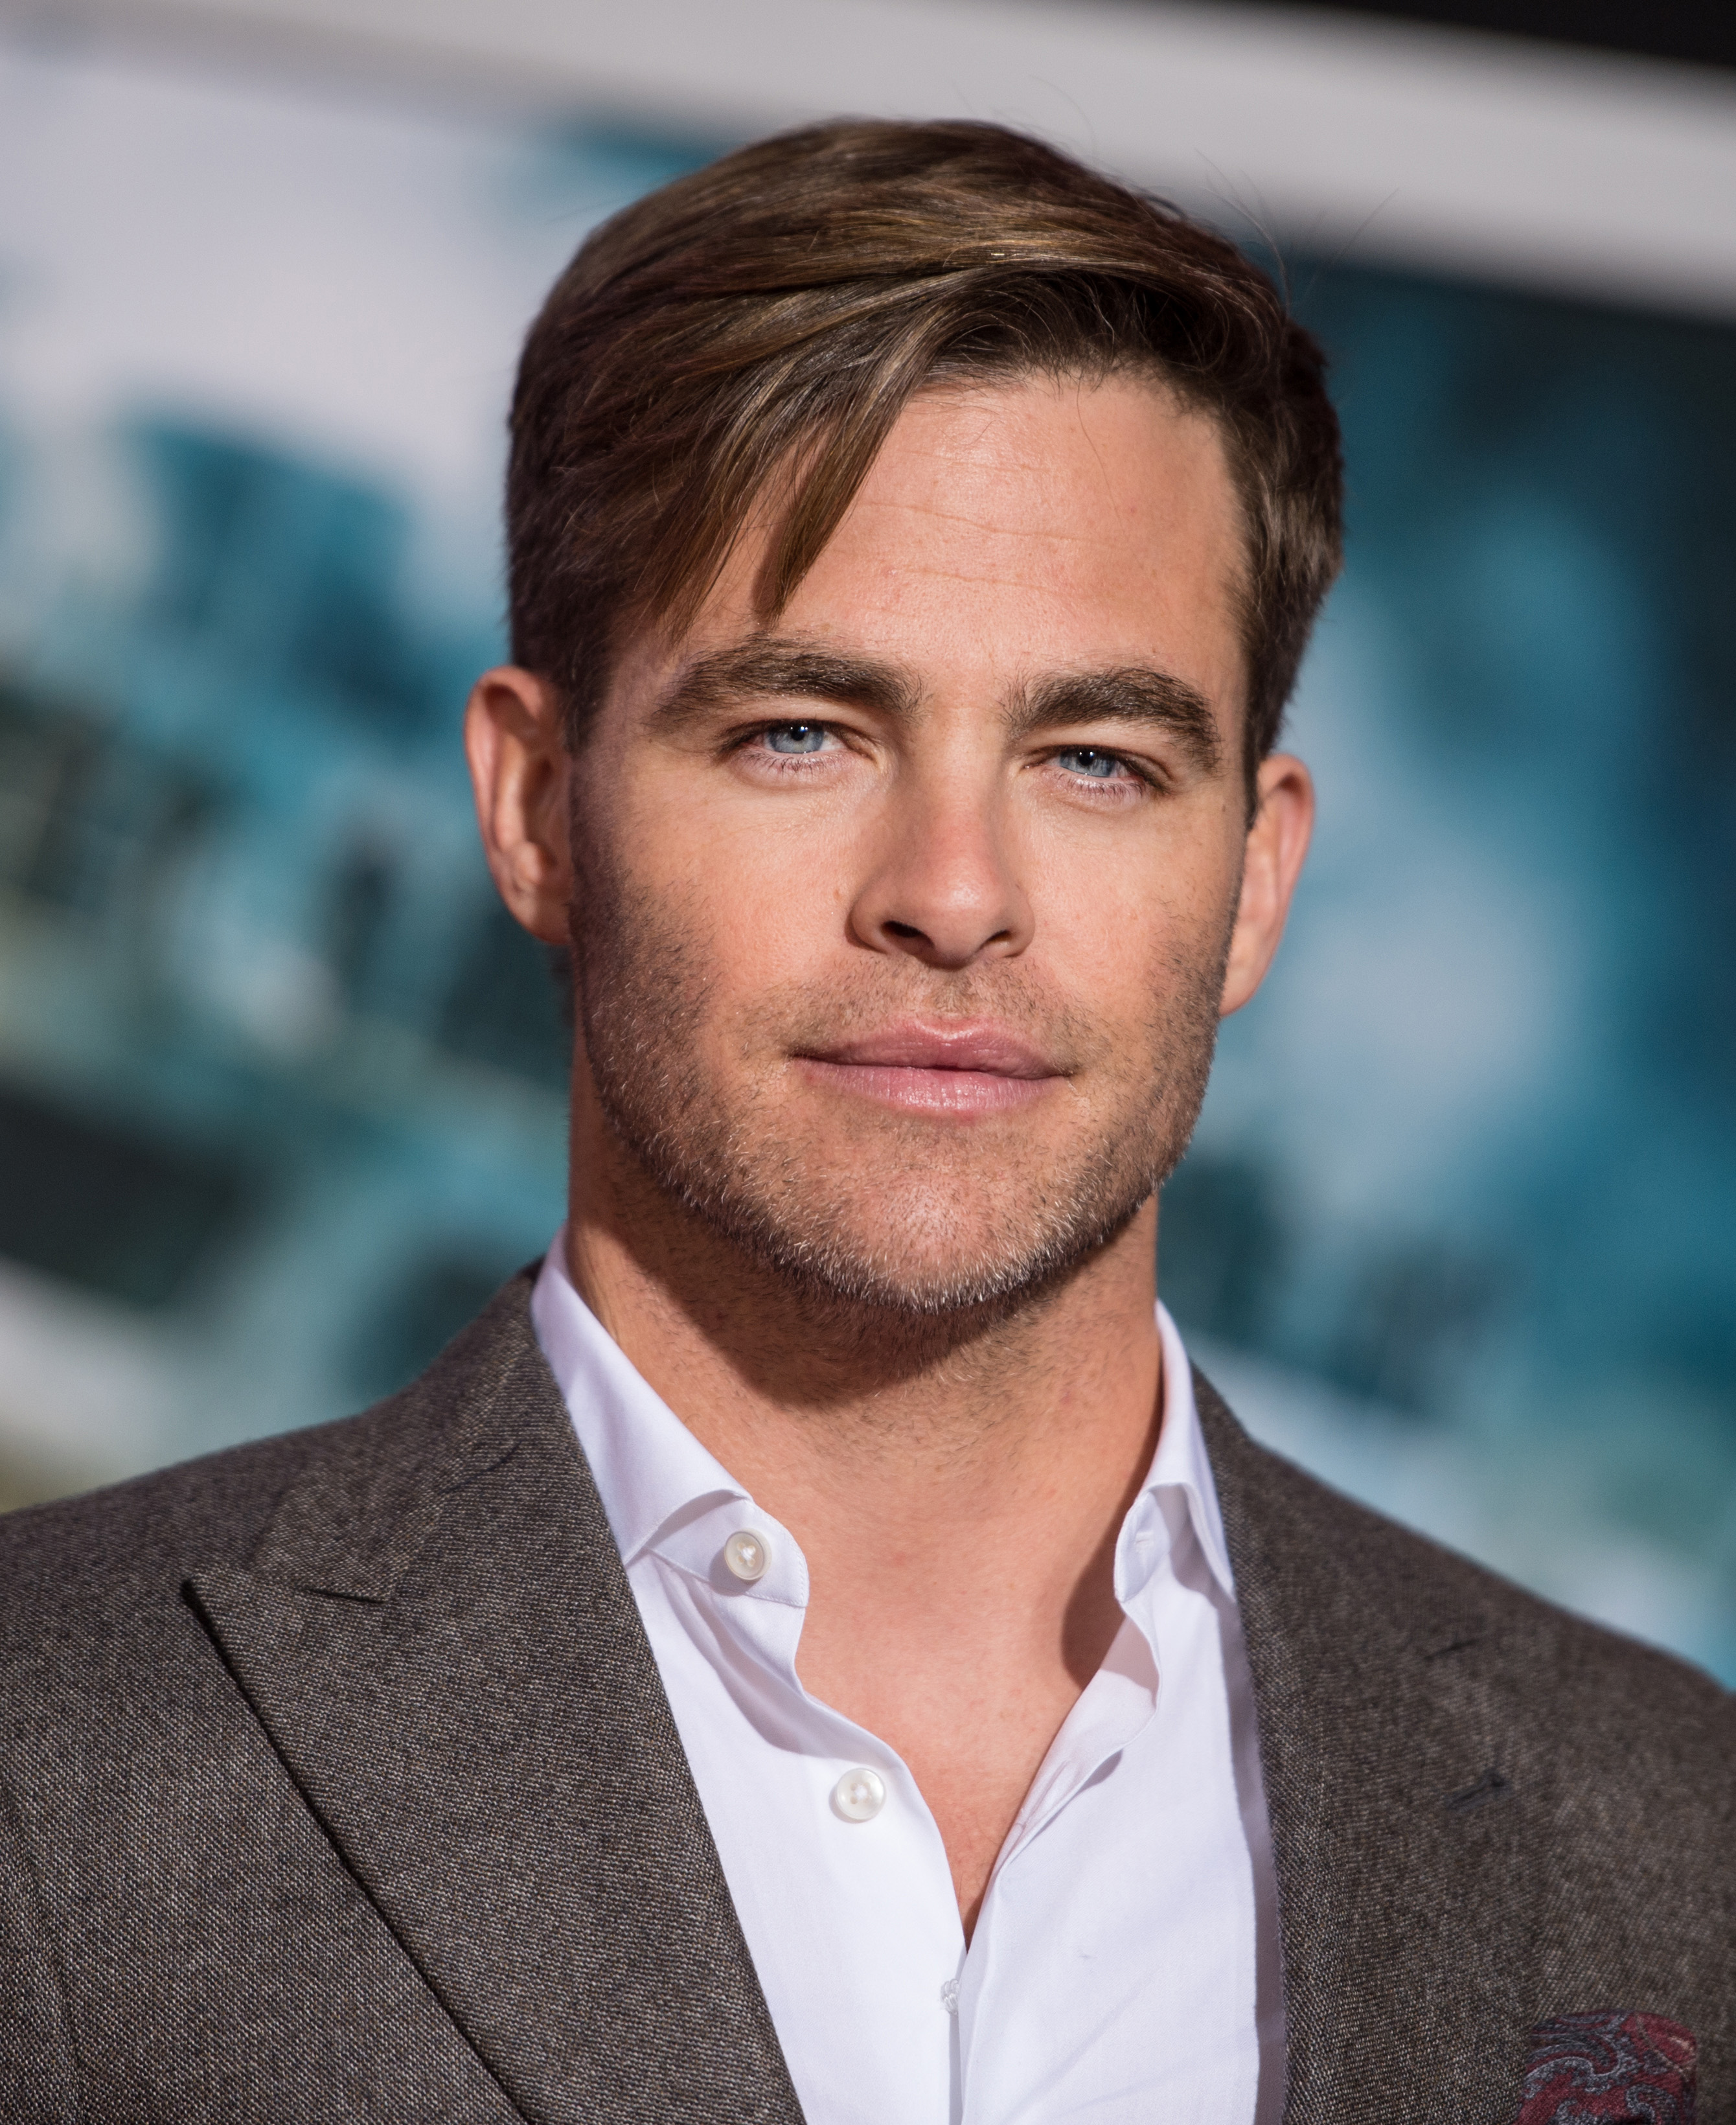 Chris Pine at the premiere of "The Finest Hours," 2016 | Source: Getty Images